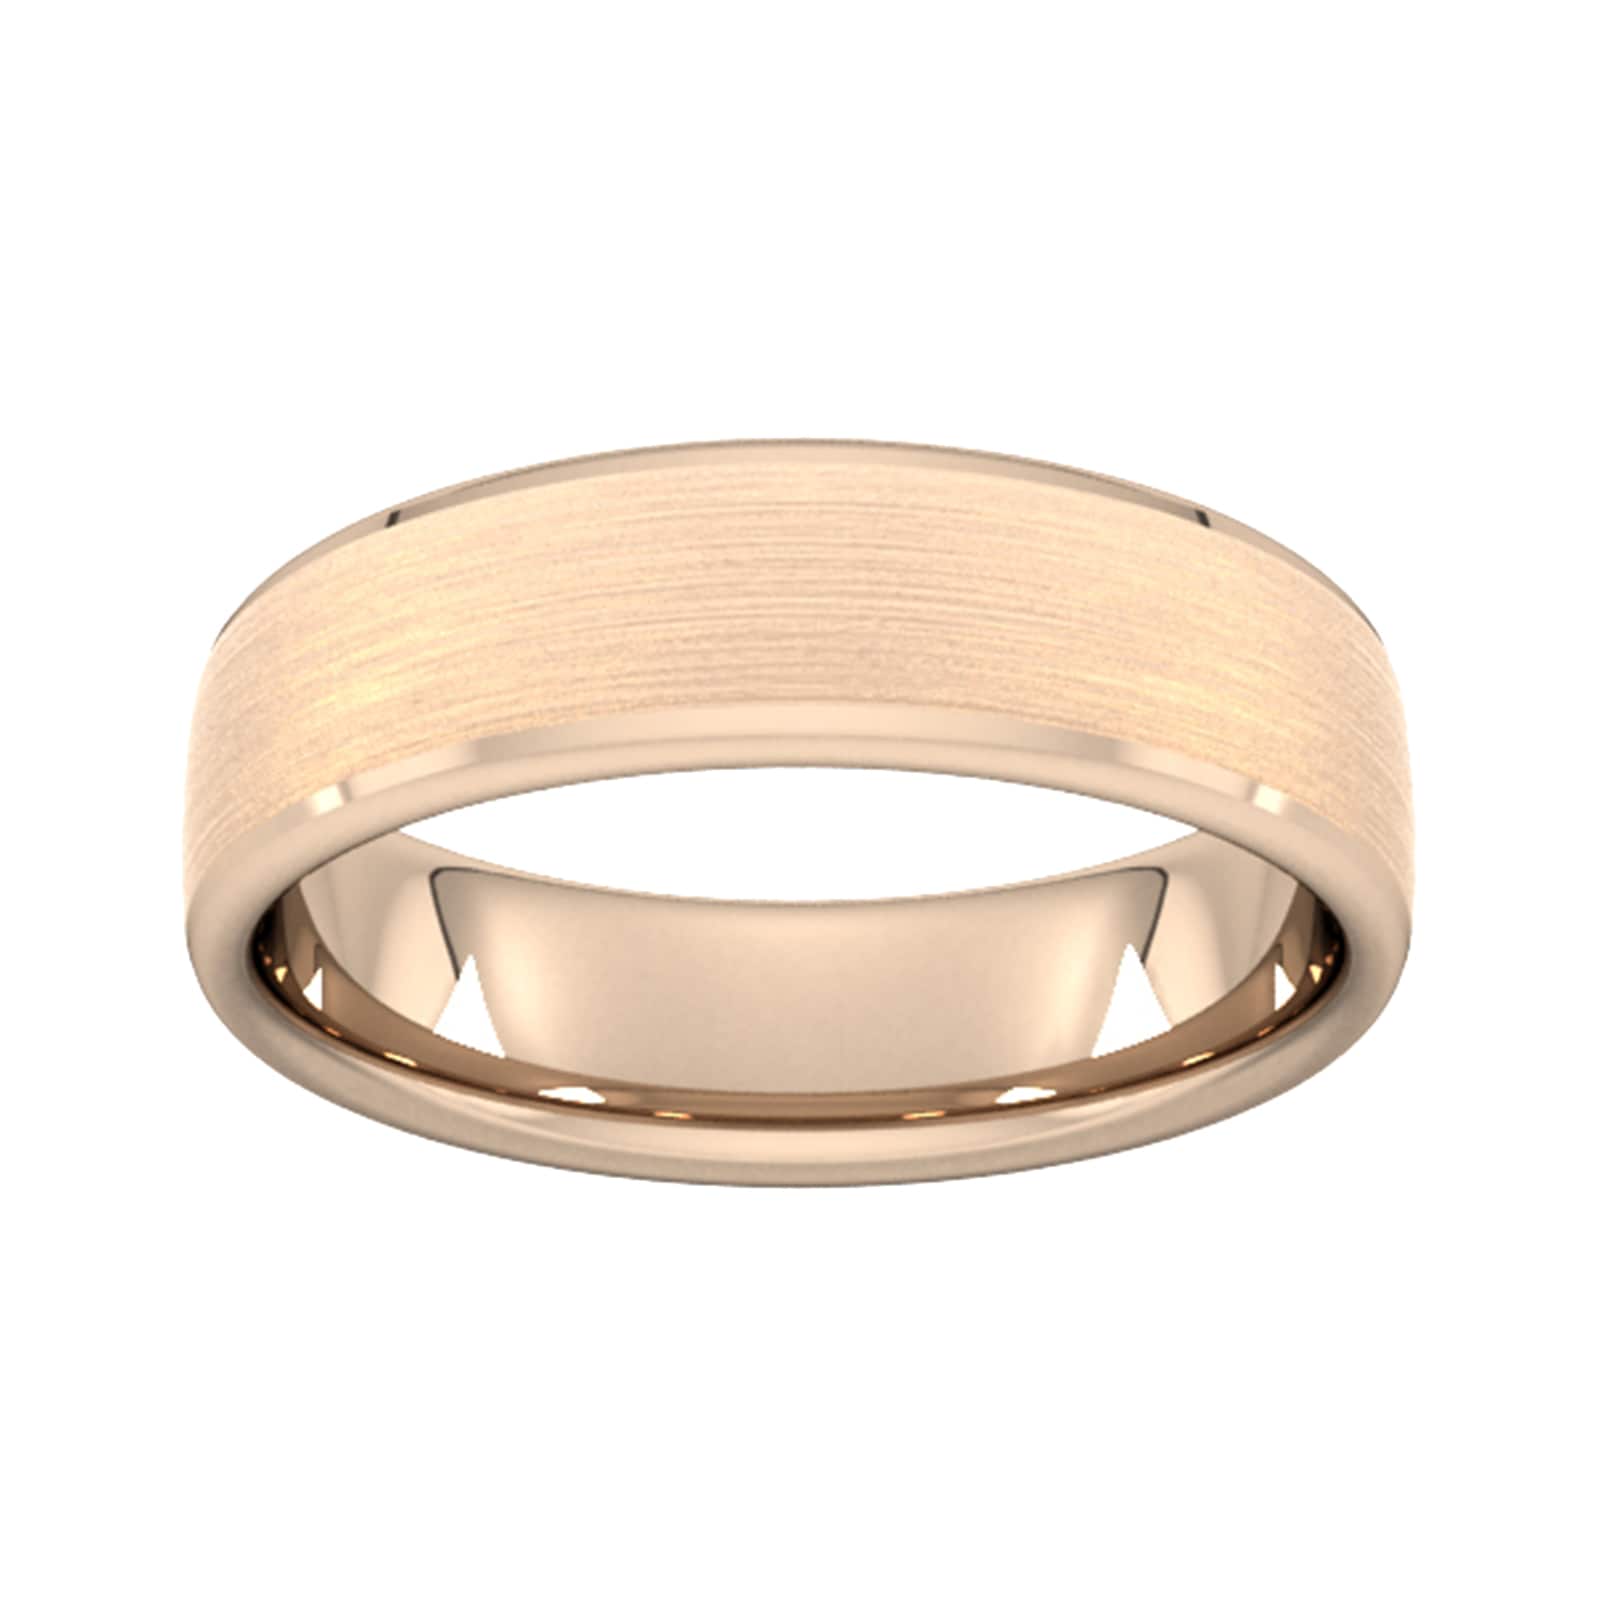 6mm D Shape Standard Polished Chamfered Edges With Matt Centre Wedding Ring In 9 Carat Rose Gold - Ring Size L